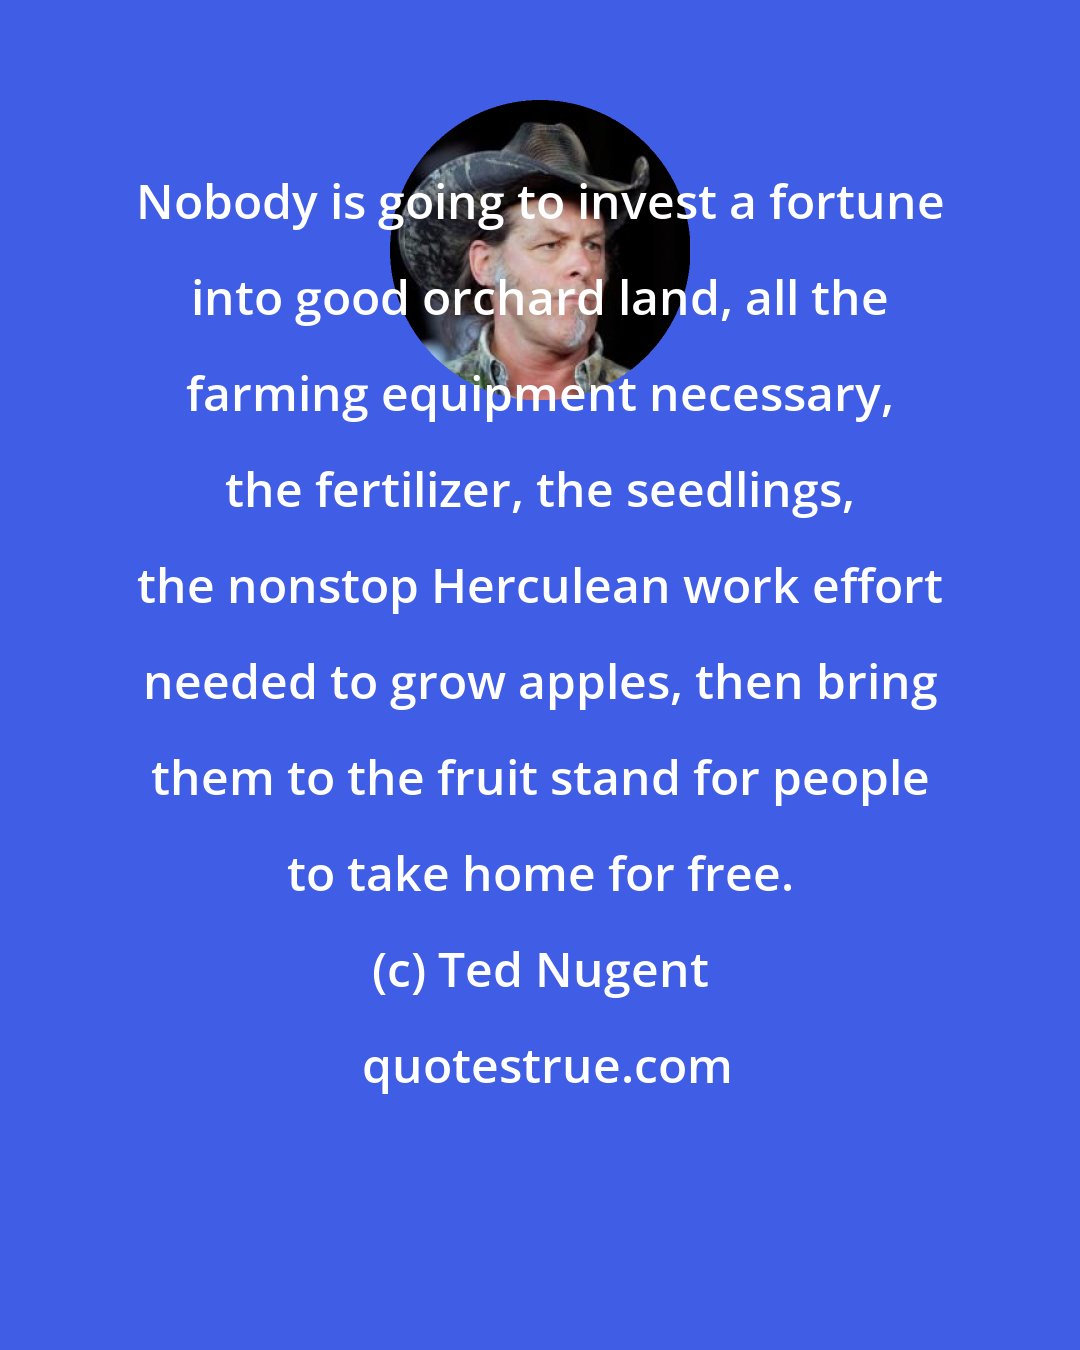 Ted Nugent: Nobody is going to invest a fortune into good orchard land, all the farming equipment necessary, the fertilizer, the seedlings, the nonstop Herculean work effort needed to grow apples, then bring them to the fruit stand for people to take home for free.